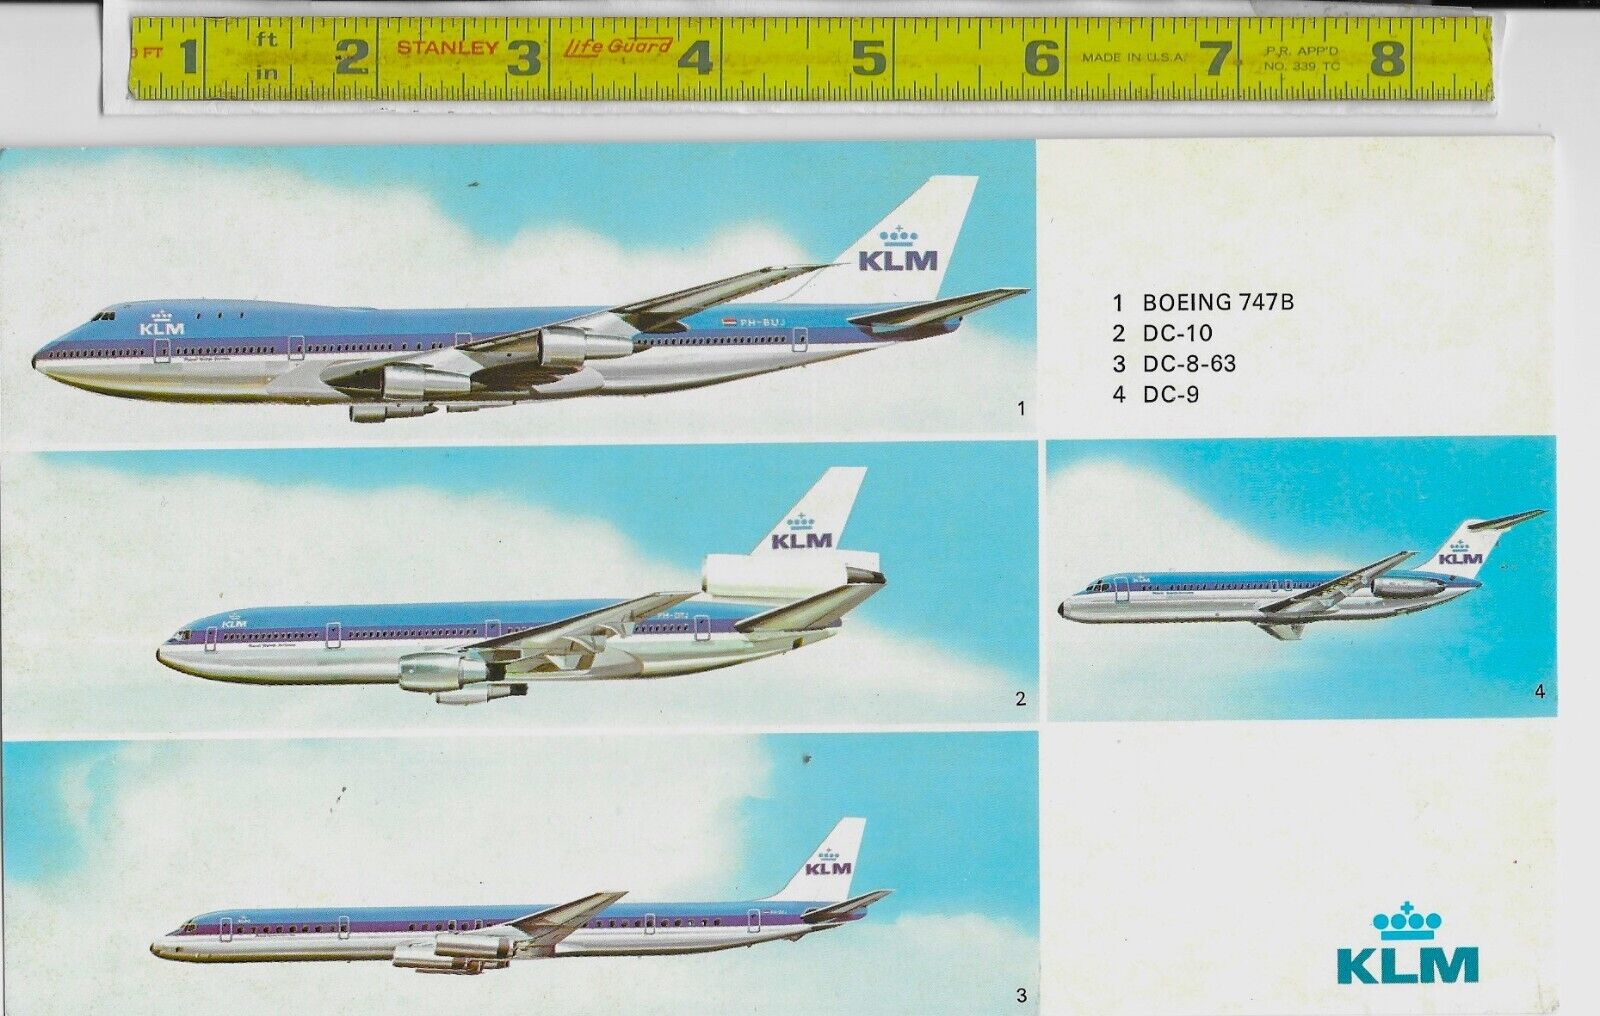 KLM Postcard DC-9, DC-8-63, DC-10, 747B Airline issued Large Card